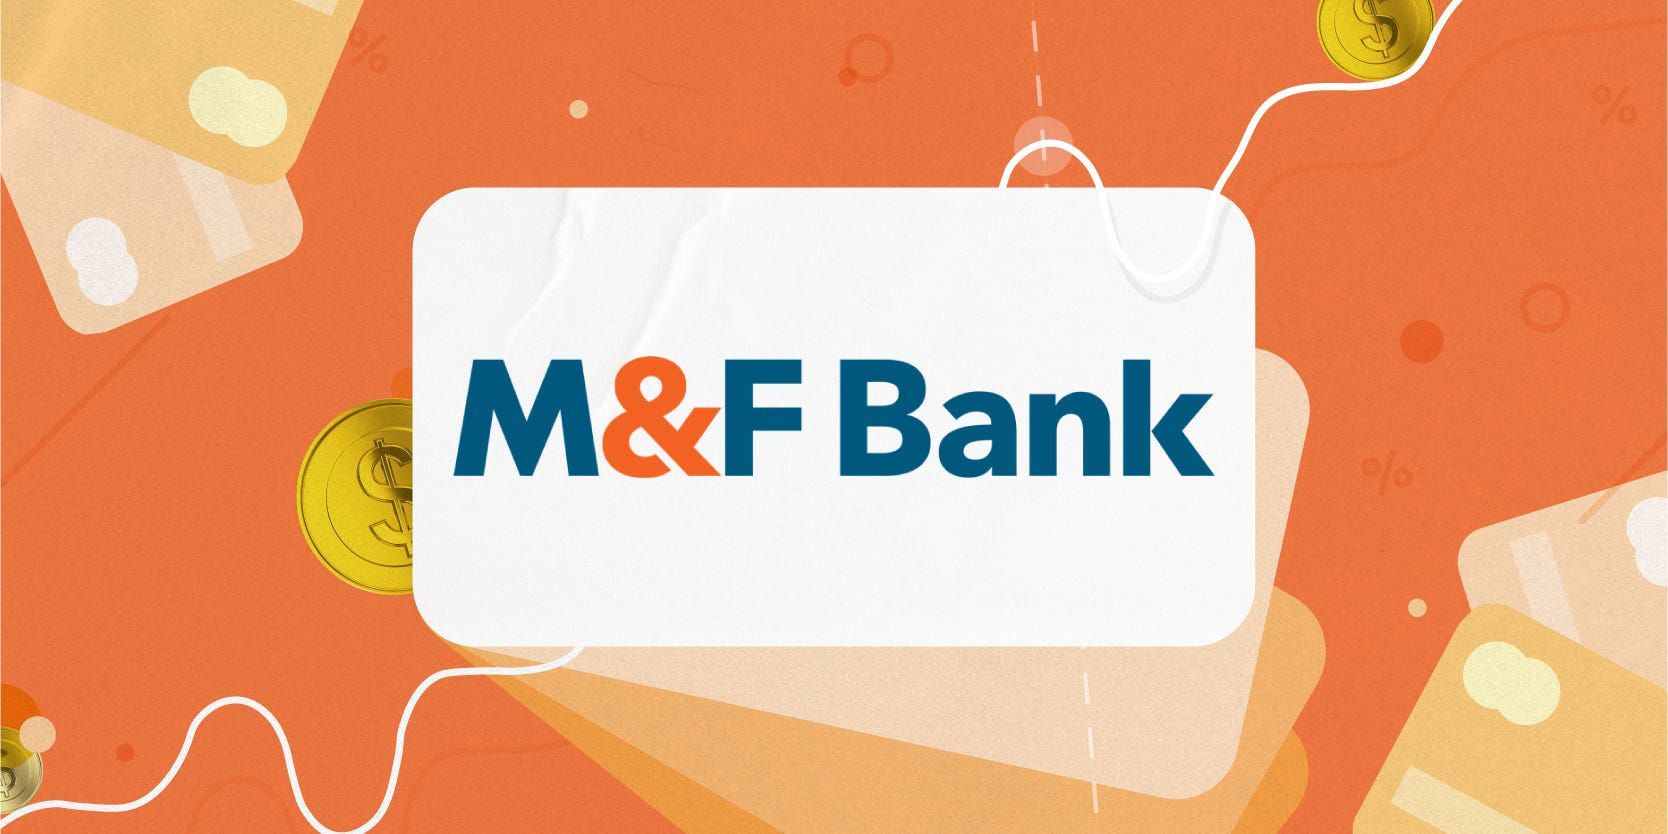 M&F Bank logo surrounded by illustrations of coins and credit cards.